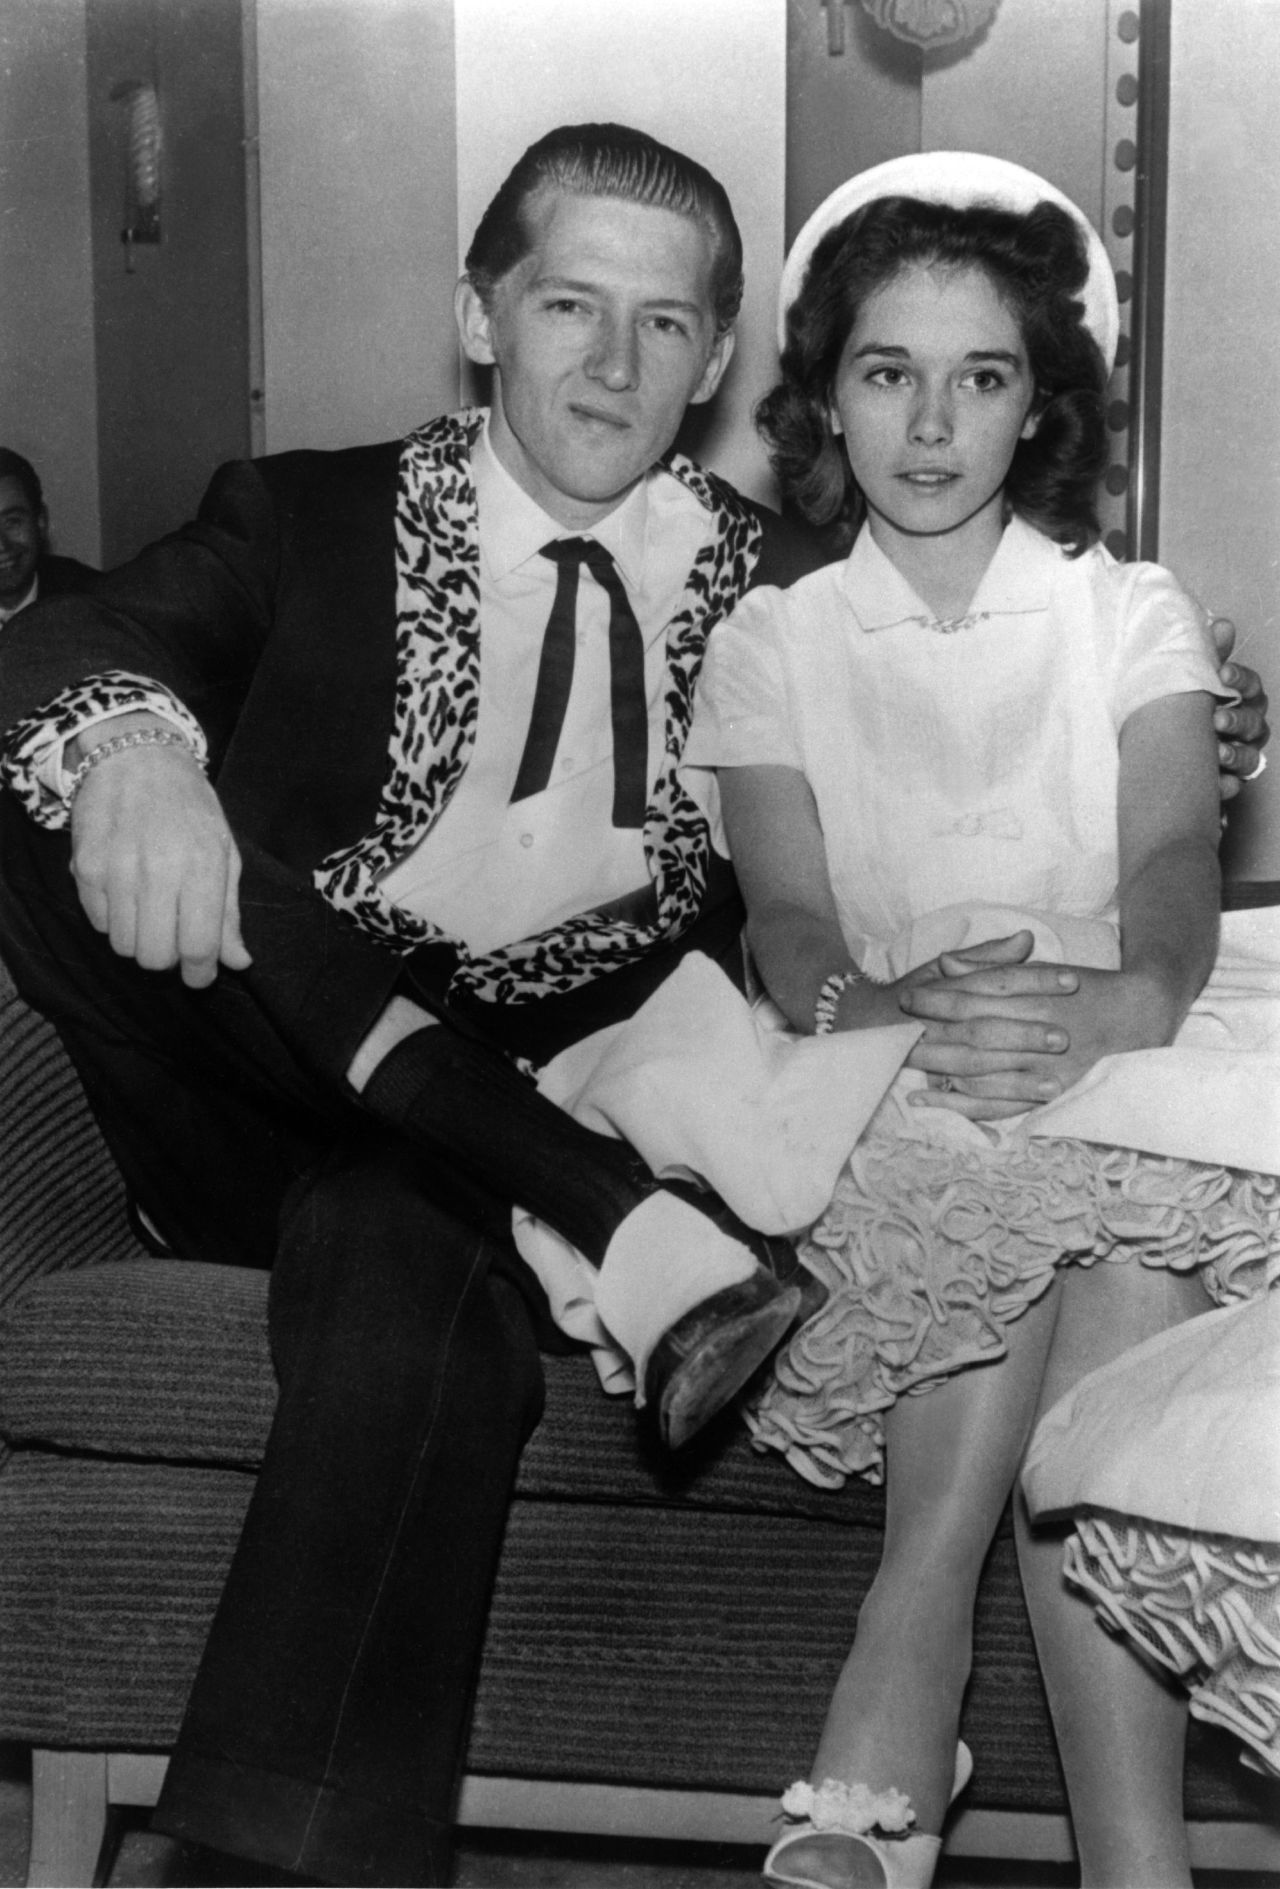 Lewis is seen with his third wife, Myra, in 1958. He was near the peak of his popularity when the public learned that he had married Myra Gale Brown, his first cousin. She was 13 at the time; Lewis was 22. News of the marriage leaked in London, where Lewis had flown to play some concerts. Lewis told the press that Myra was 15, but the truth soon came out and caused an outcry, as newspapers blared such headlines as "Fans Aghast at Child Bride." Audiences heckled Lewis, and the tour was canceled after three shows. 